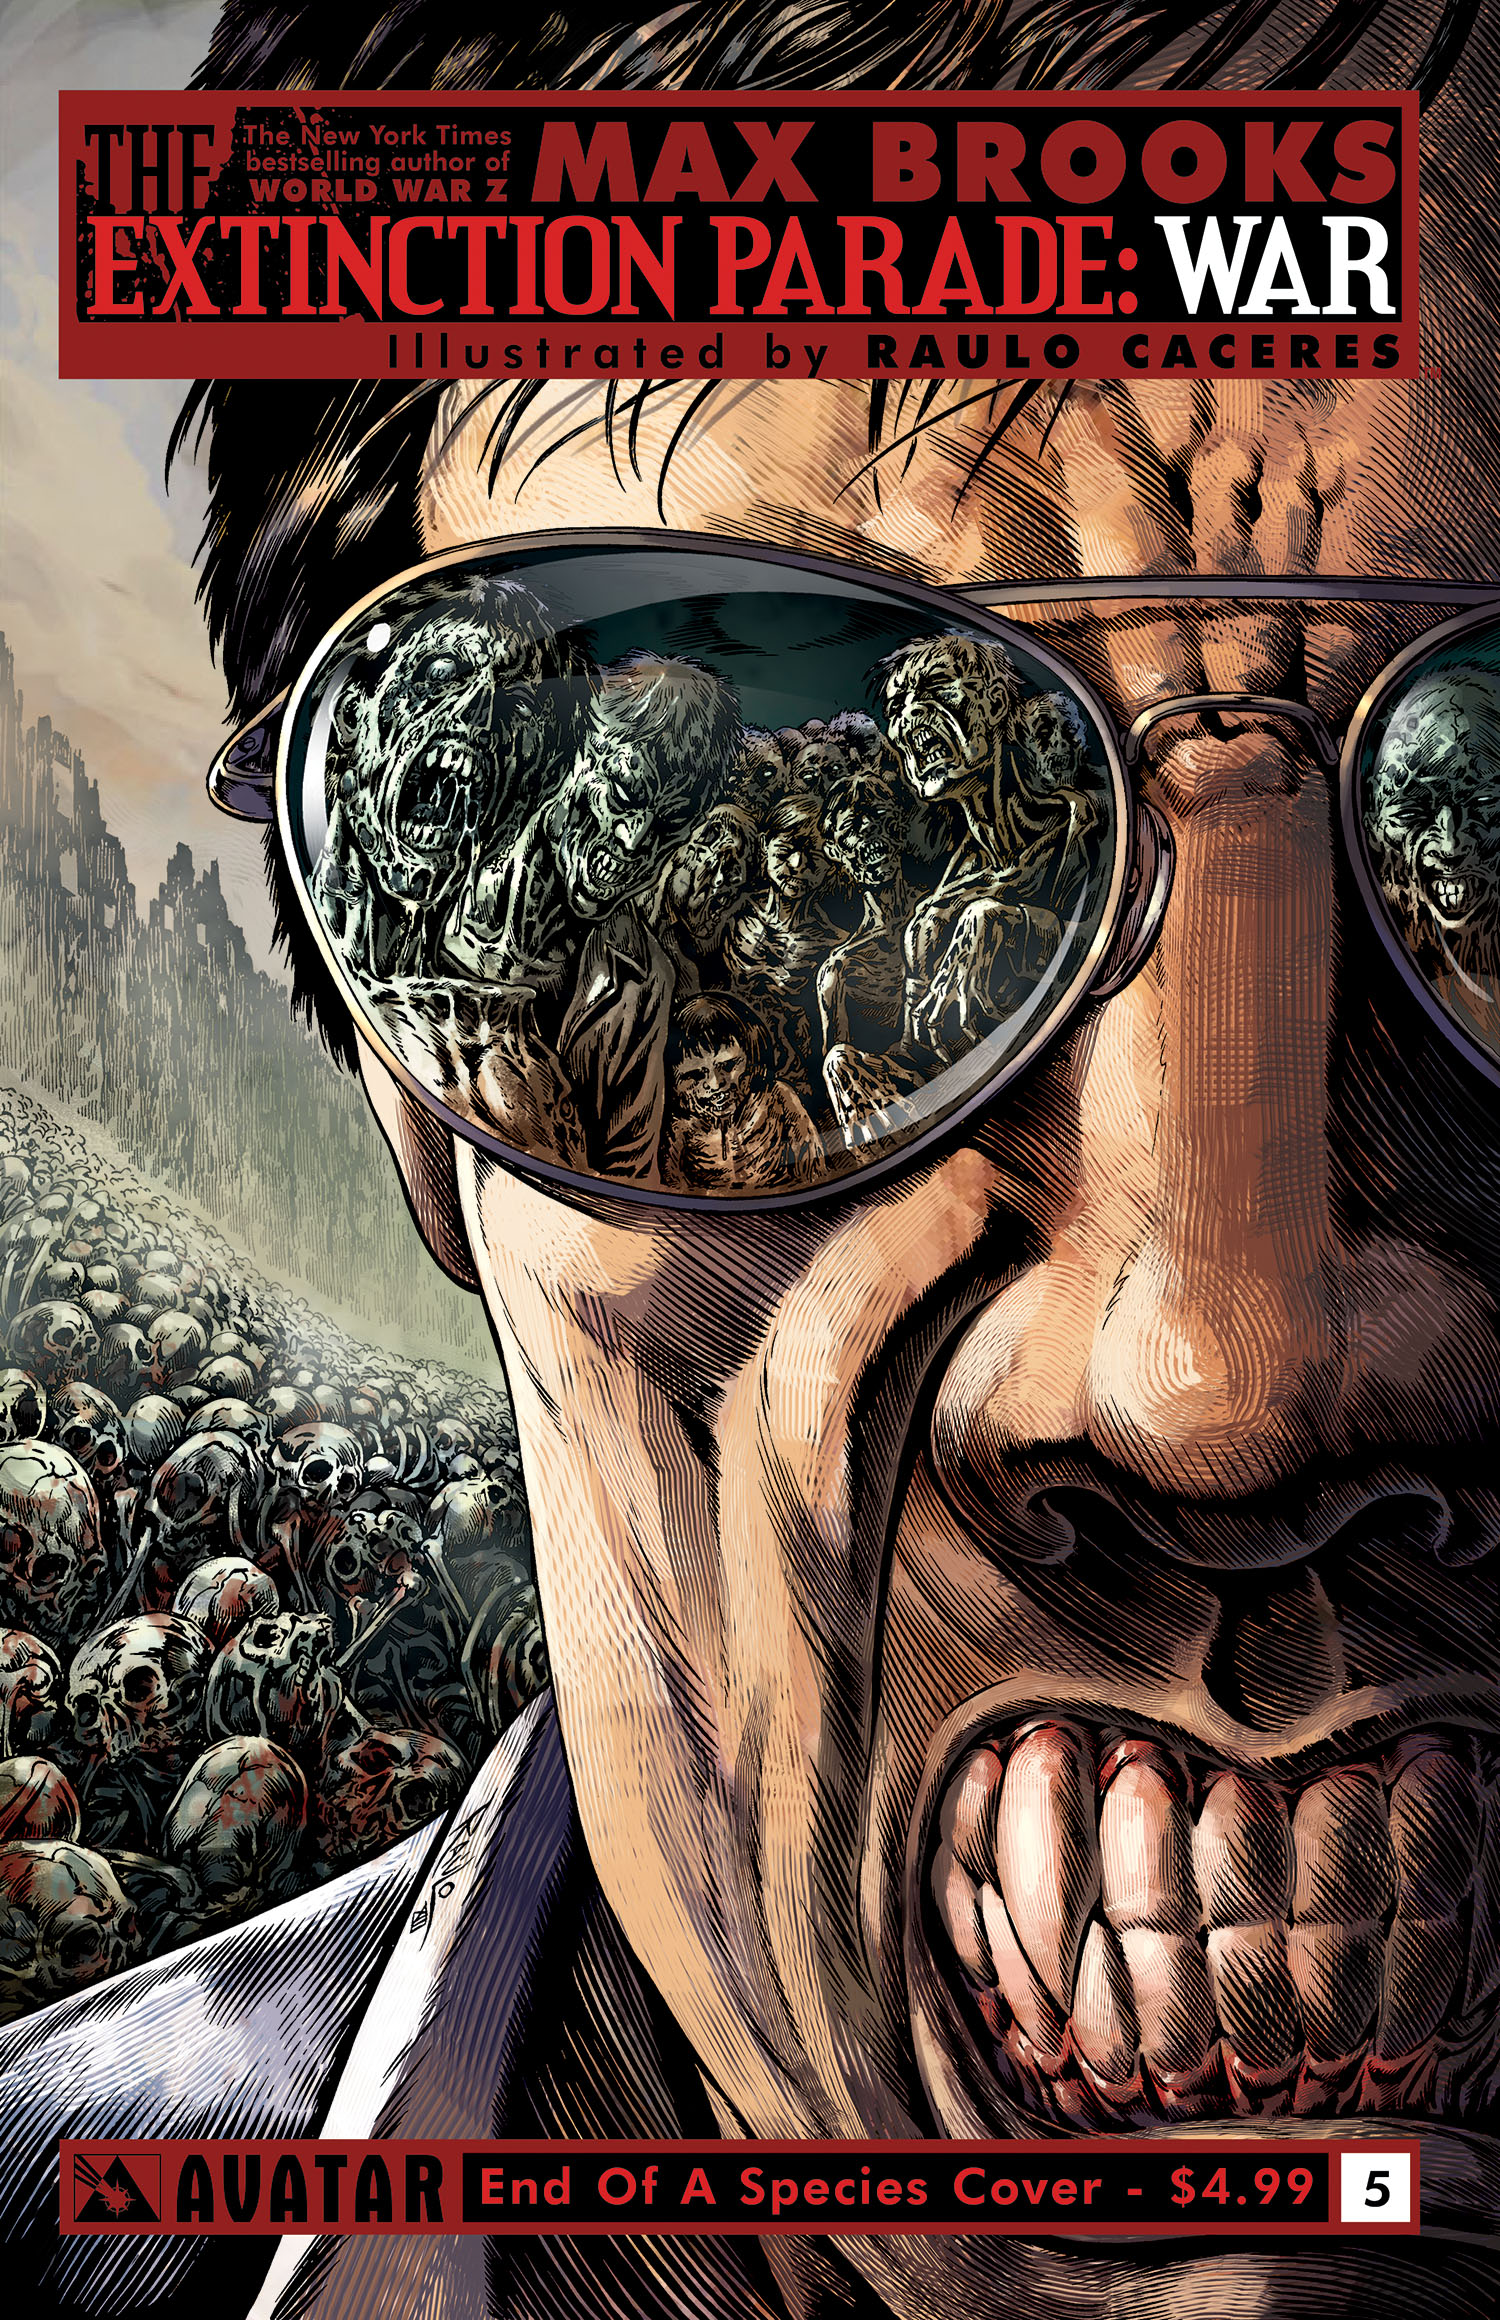 Read online The Extinction Parade: War comic -  Issue #5 - 4